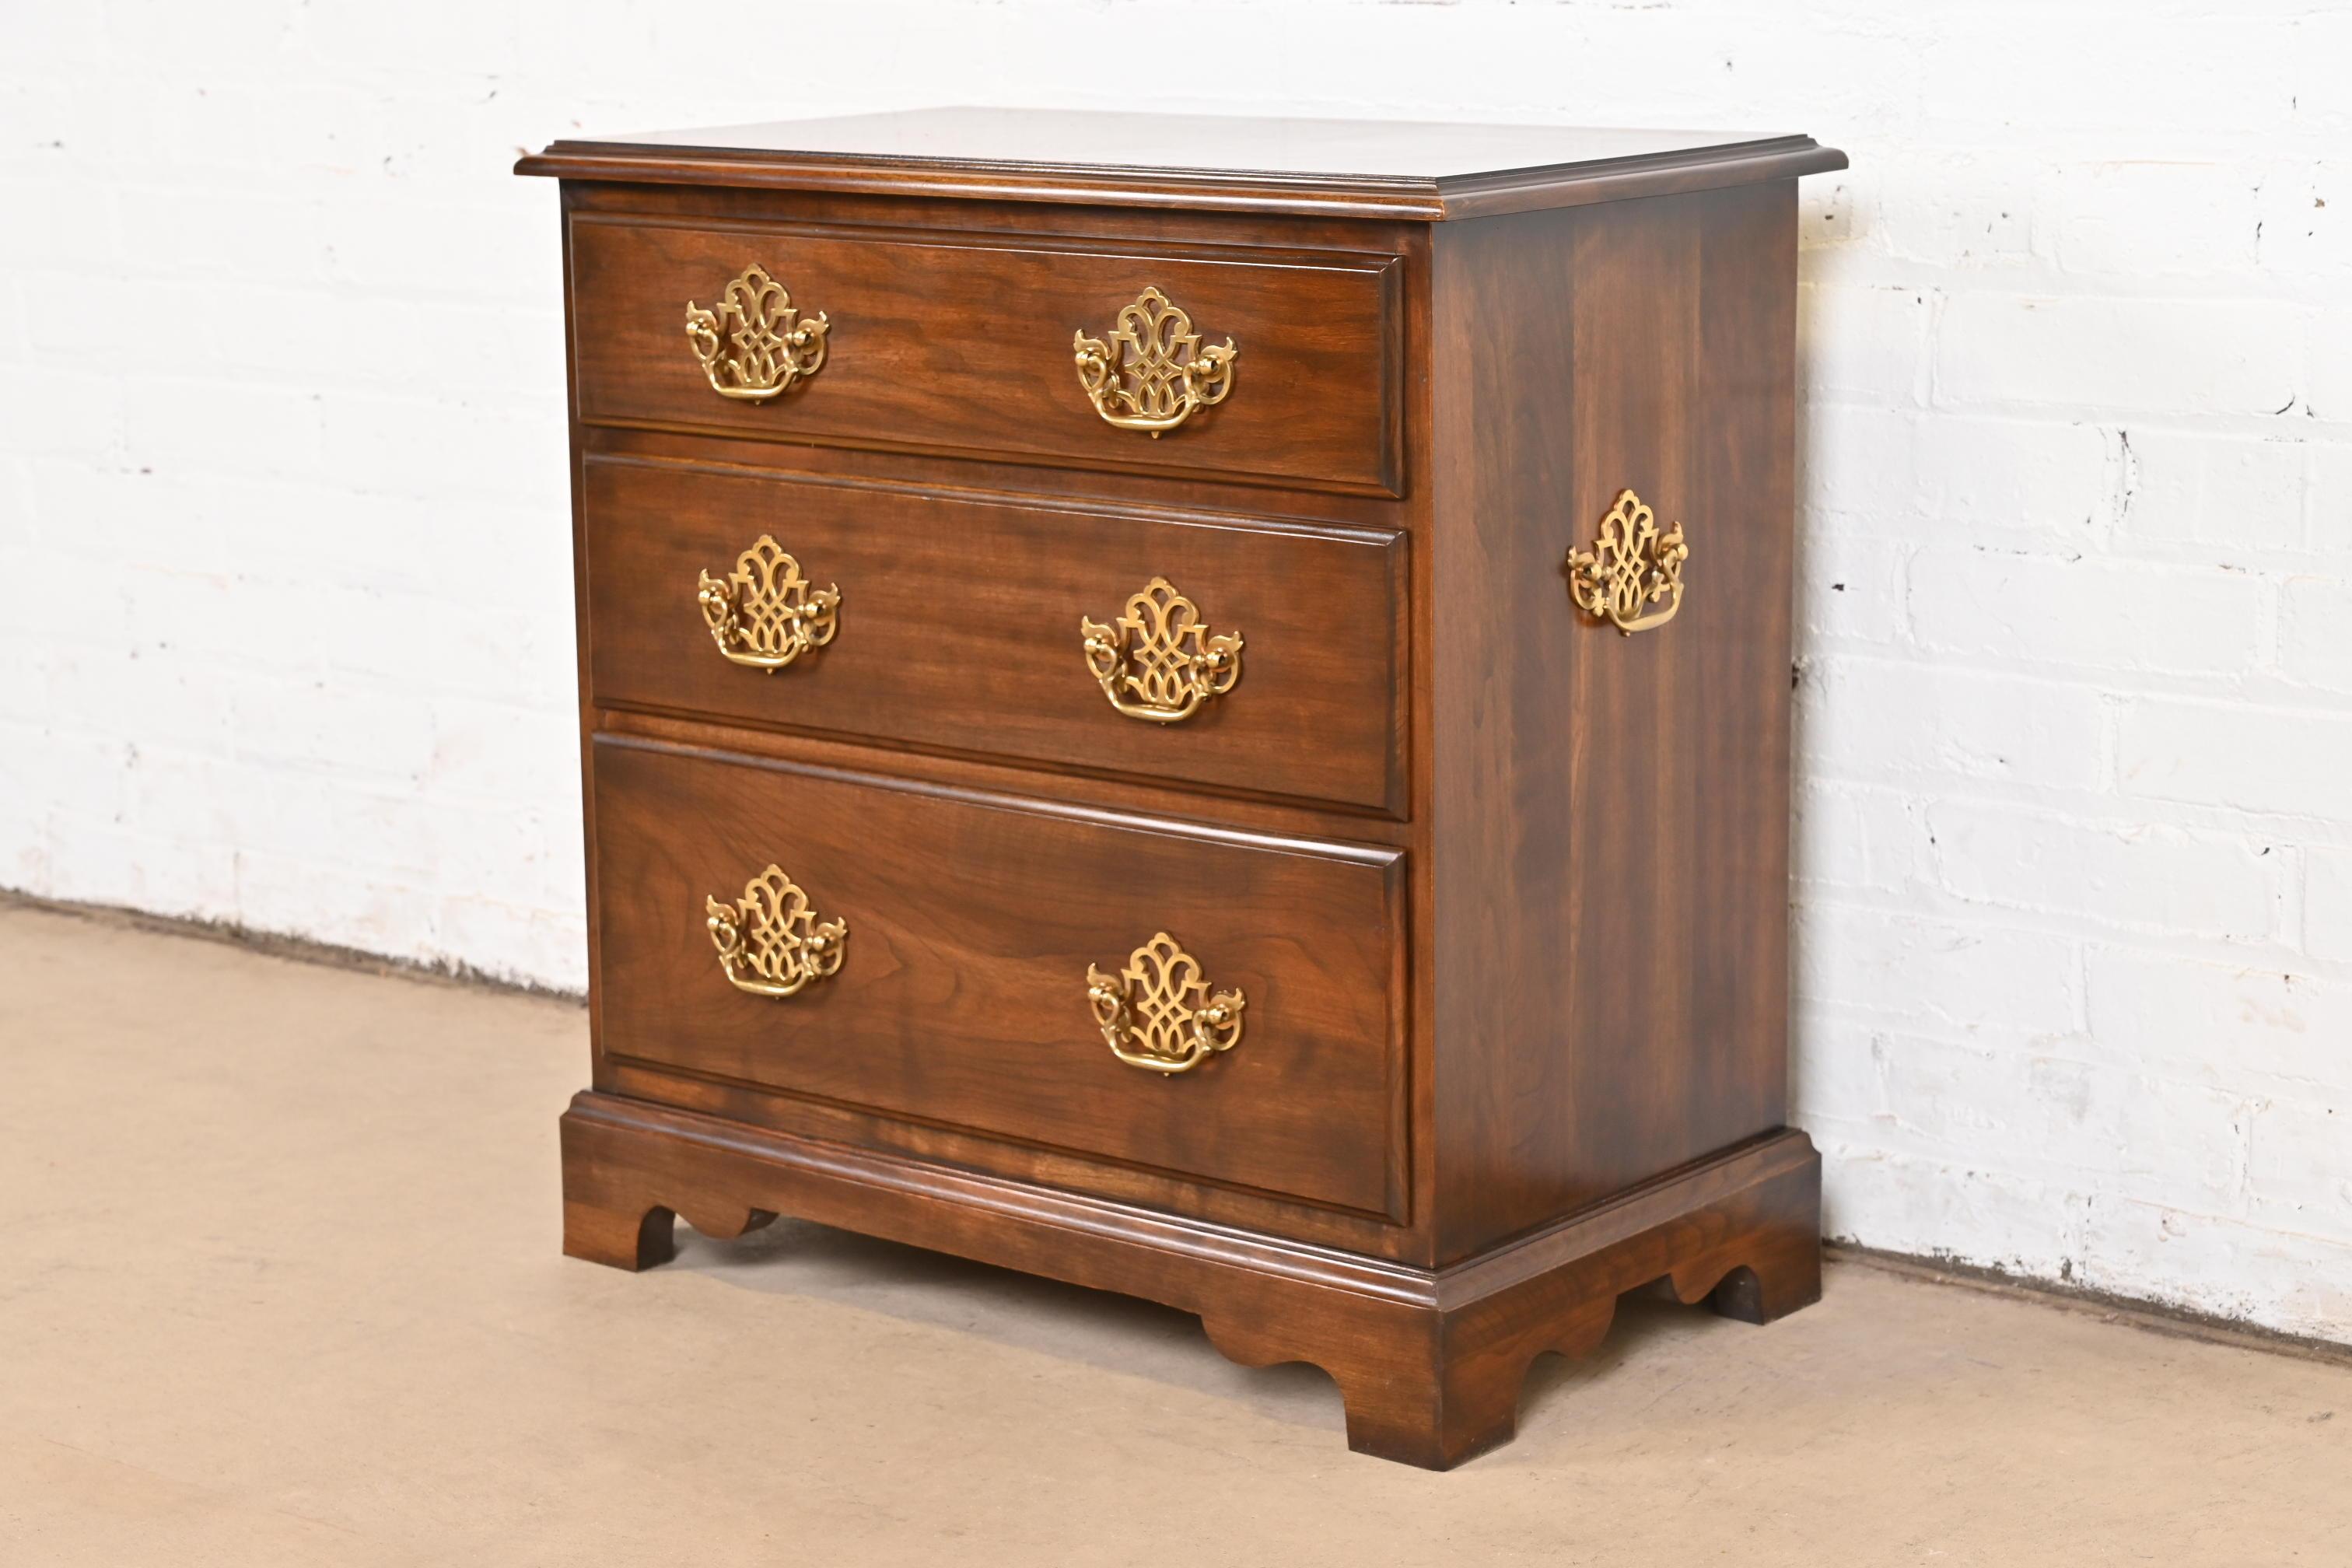 Harden Furniture Georgian Solid Cherry Wood Three-Drawer Bedside Chest In Good Condition For Sale In South Bend, IN